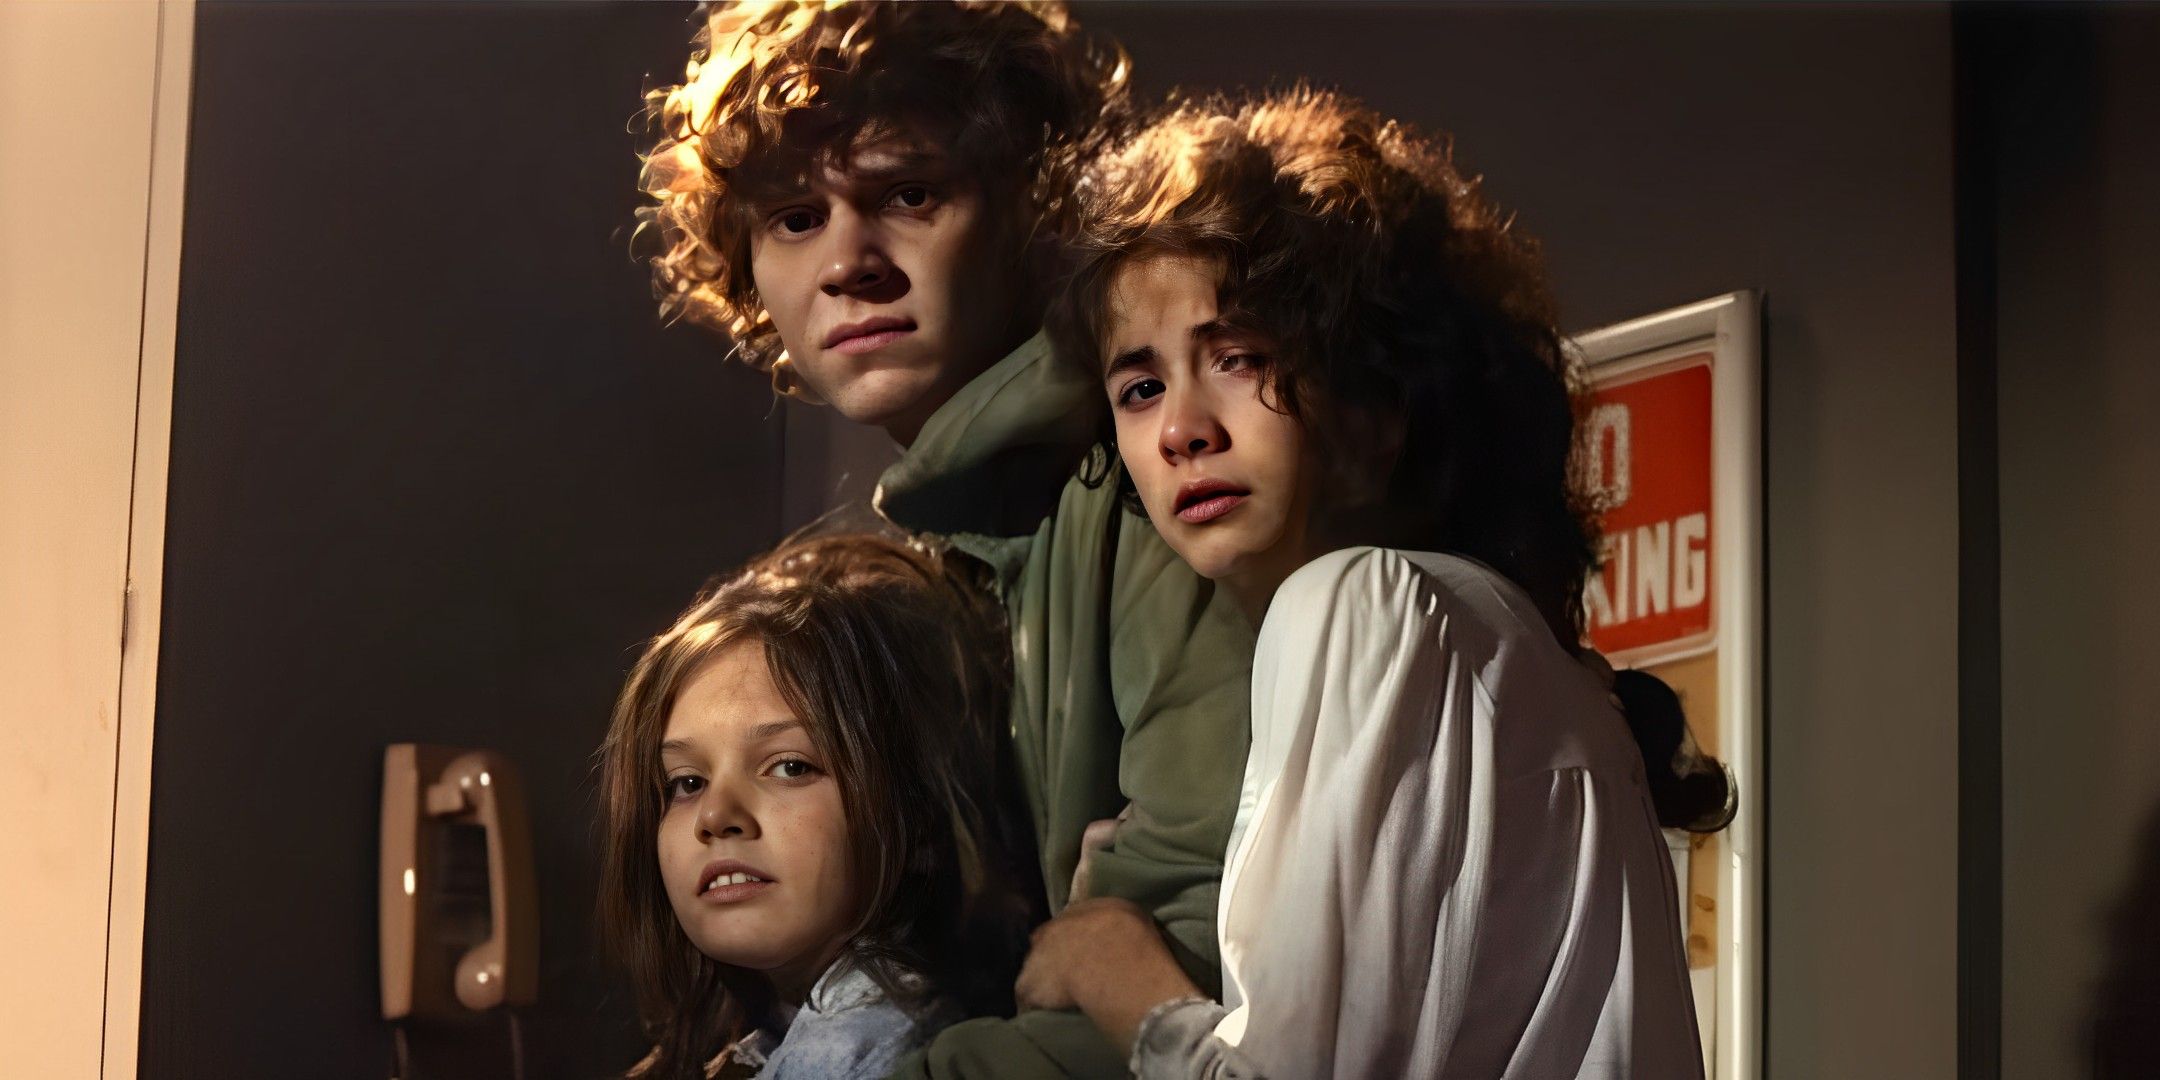 Evan Peters' Charlie looking over in fear with Aimee and Mae cowering against him in Criminal Minds "Mosley Lane."